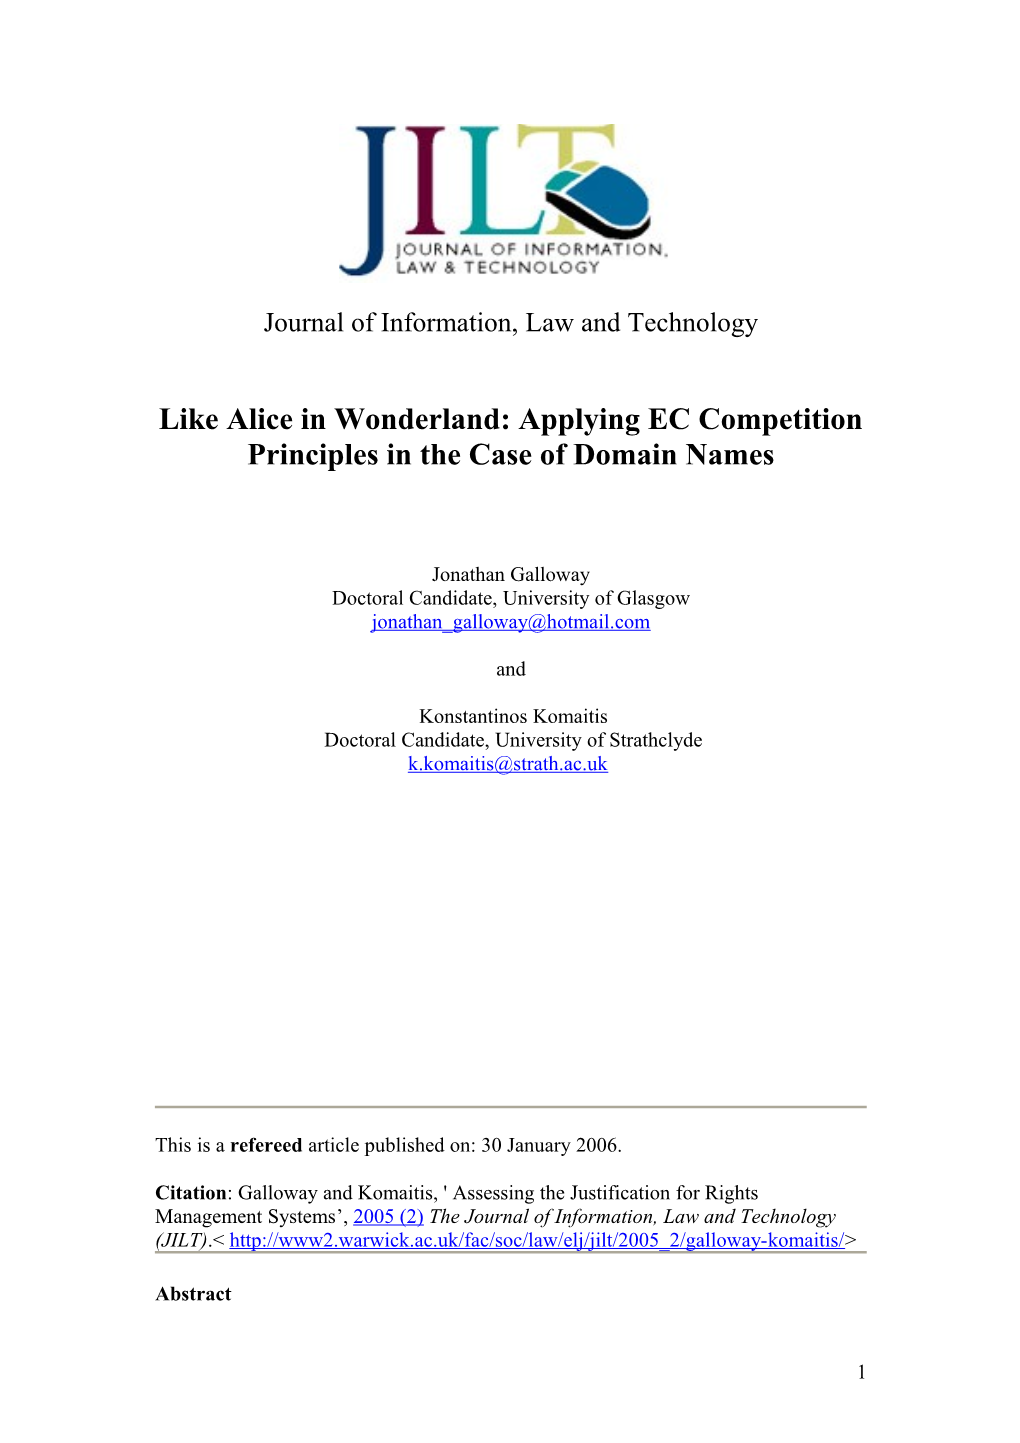 Defining Ec Competition Law in the Domain Name Market